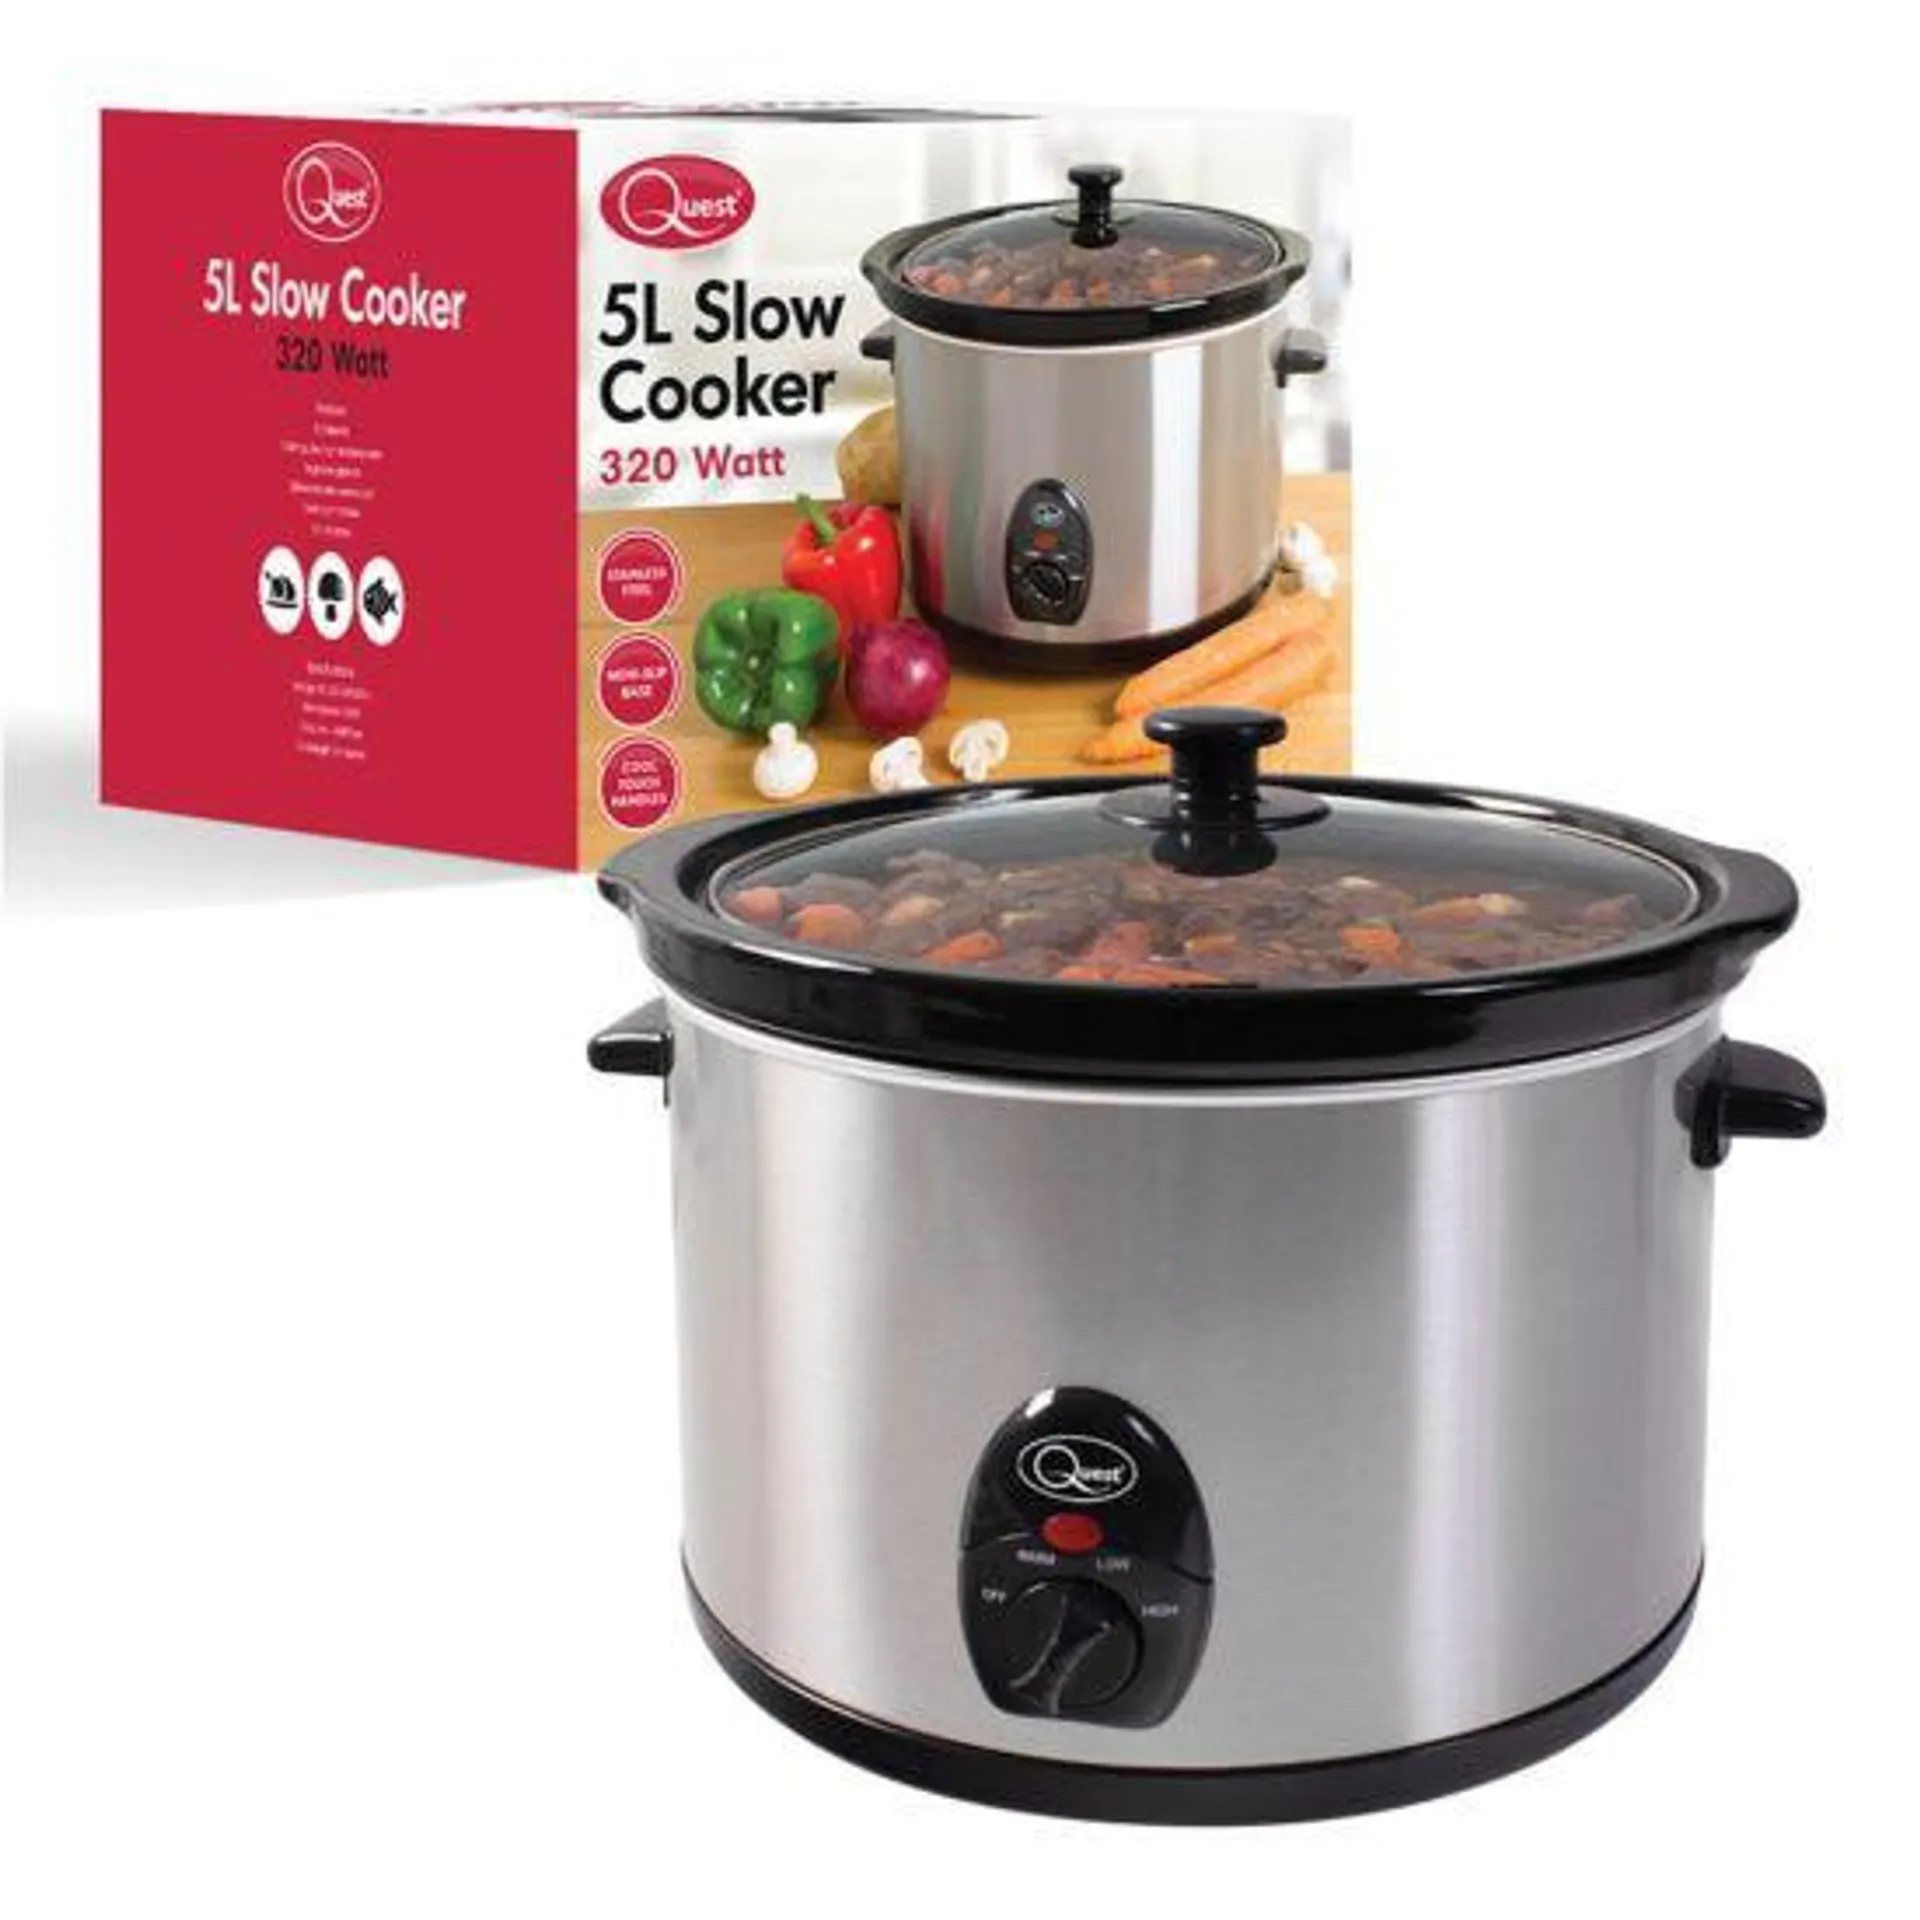 Quest 35280 5L Electrical Slow Cooker - Stainless Steel